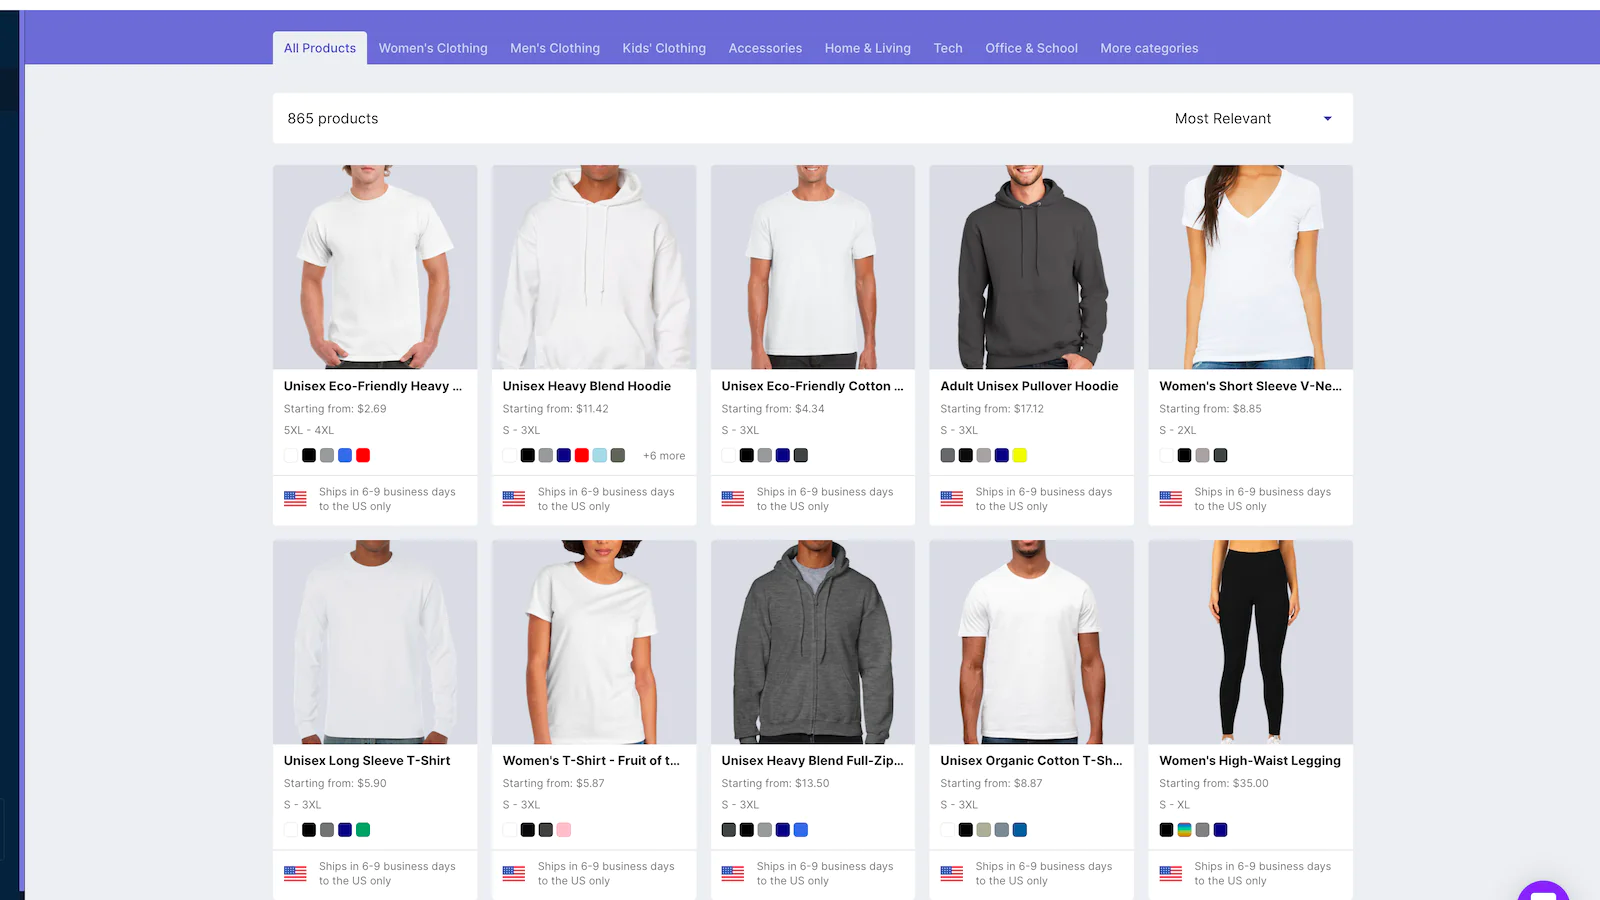 Clothing products ready for dropshipping including t-shirts, hoodies, and leggings